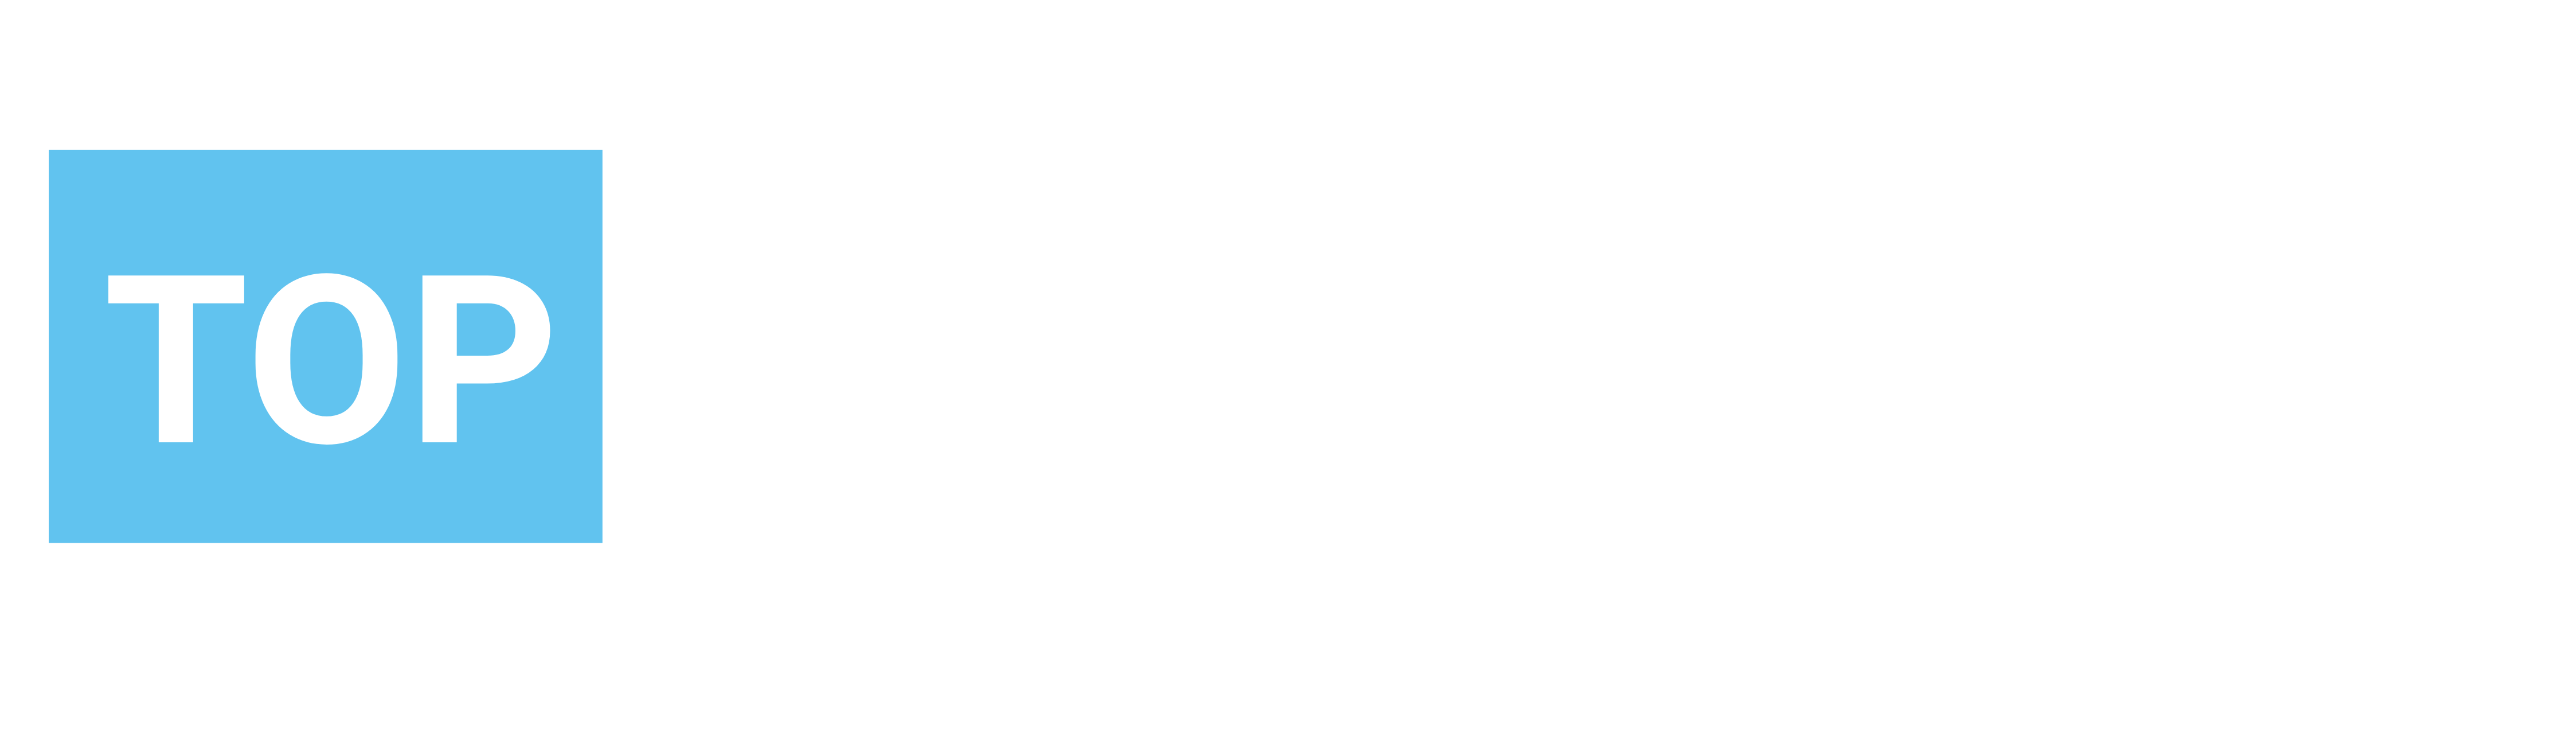 Top Executive Hunt Inc. - Free Directory of Recruiters and Executive Search Firms